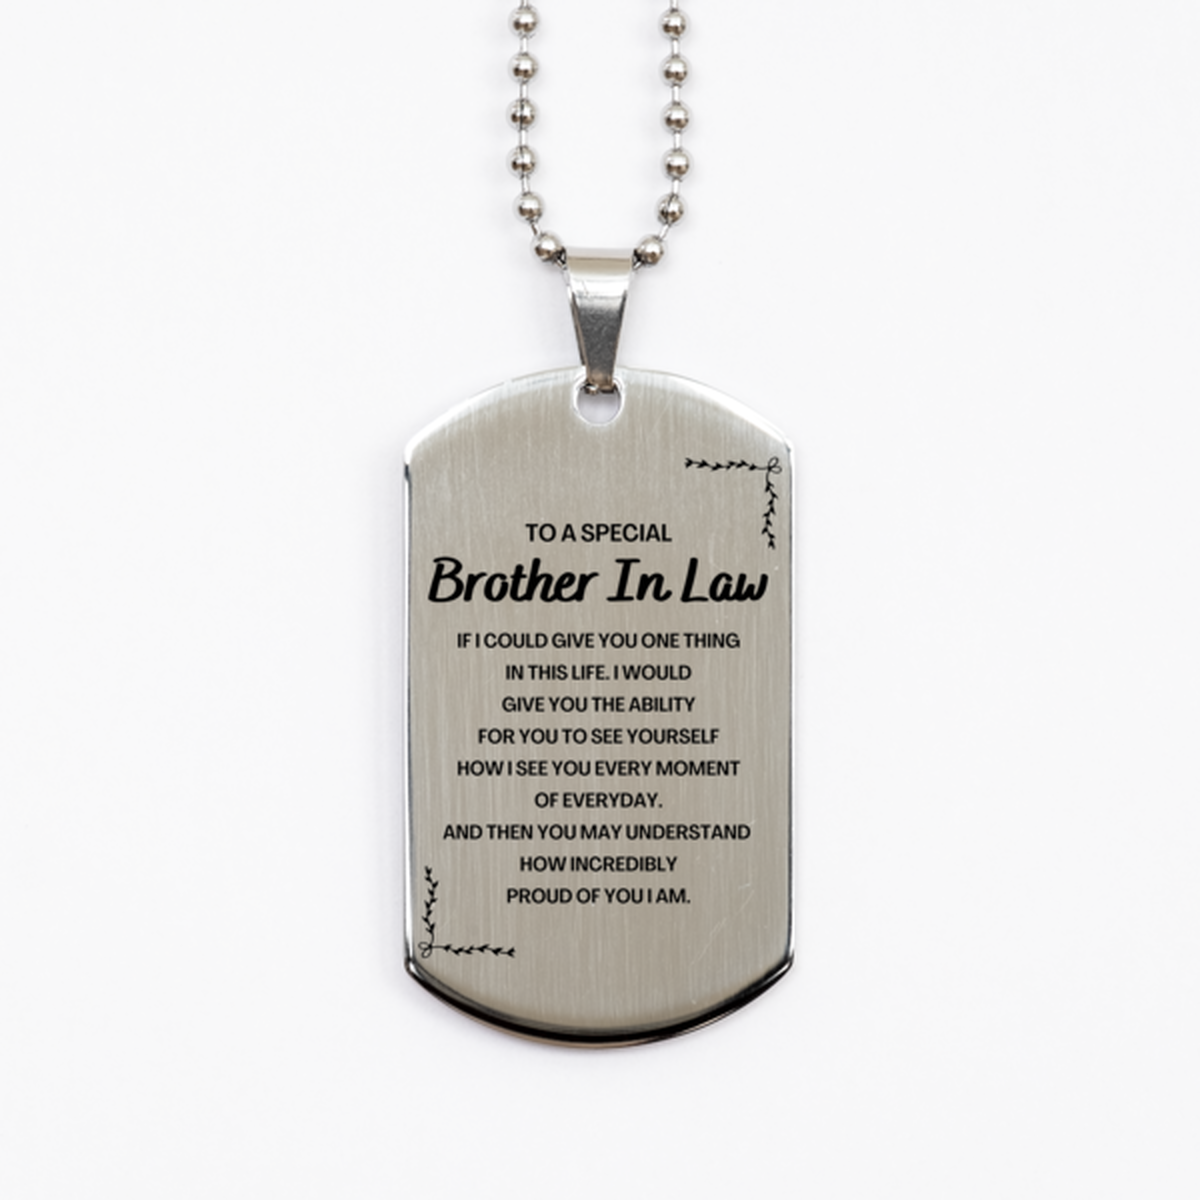 To My Brother In Law Silver Dog Tag, Gifts For Brother In Law Engraved, Inspirational Gifts for Christmas Birthday, Epic Gifts for Brother In Law To A Special Brother In Law how incredibly proud of you I am